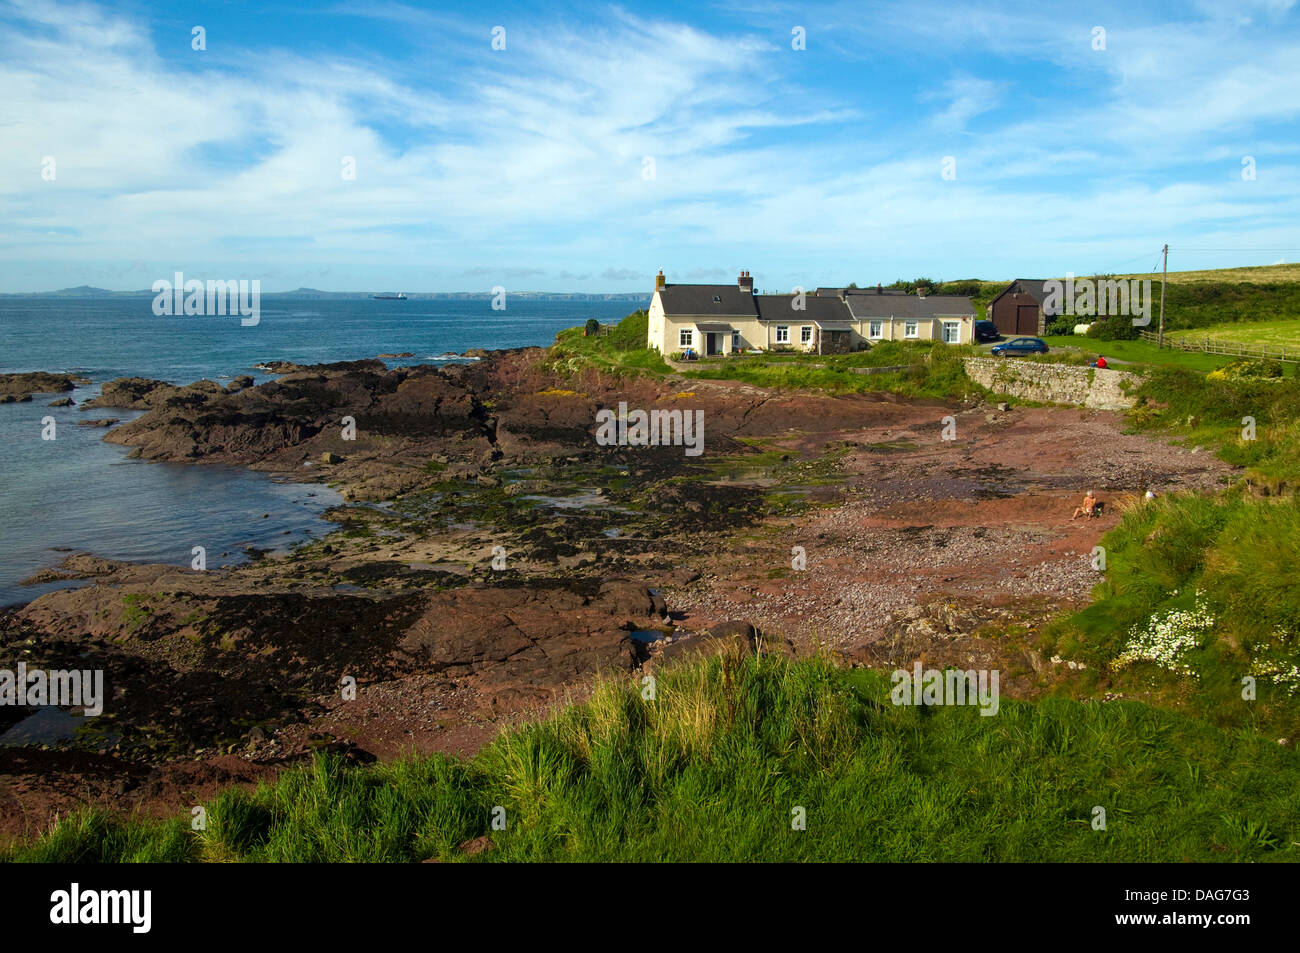 panoramic view over St. Brides Bay at the Pembrokeshire coast path popular with anglers, divers or artists, United Kingdom, Wales, Pembrokeshire Stock Photo